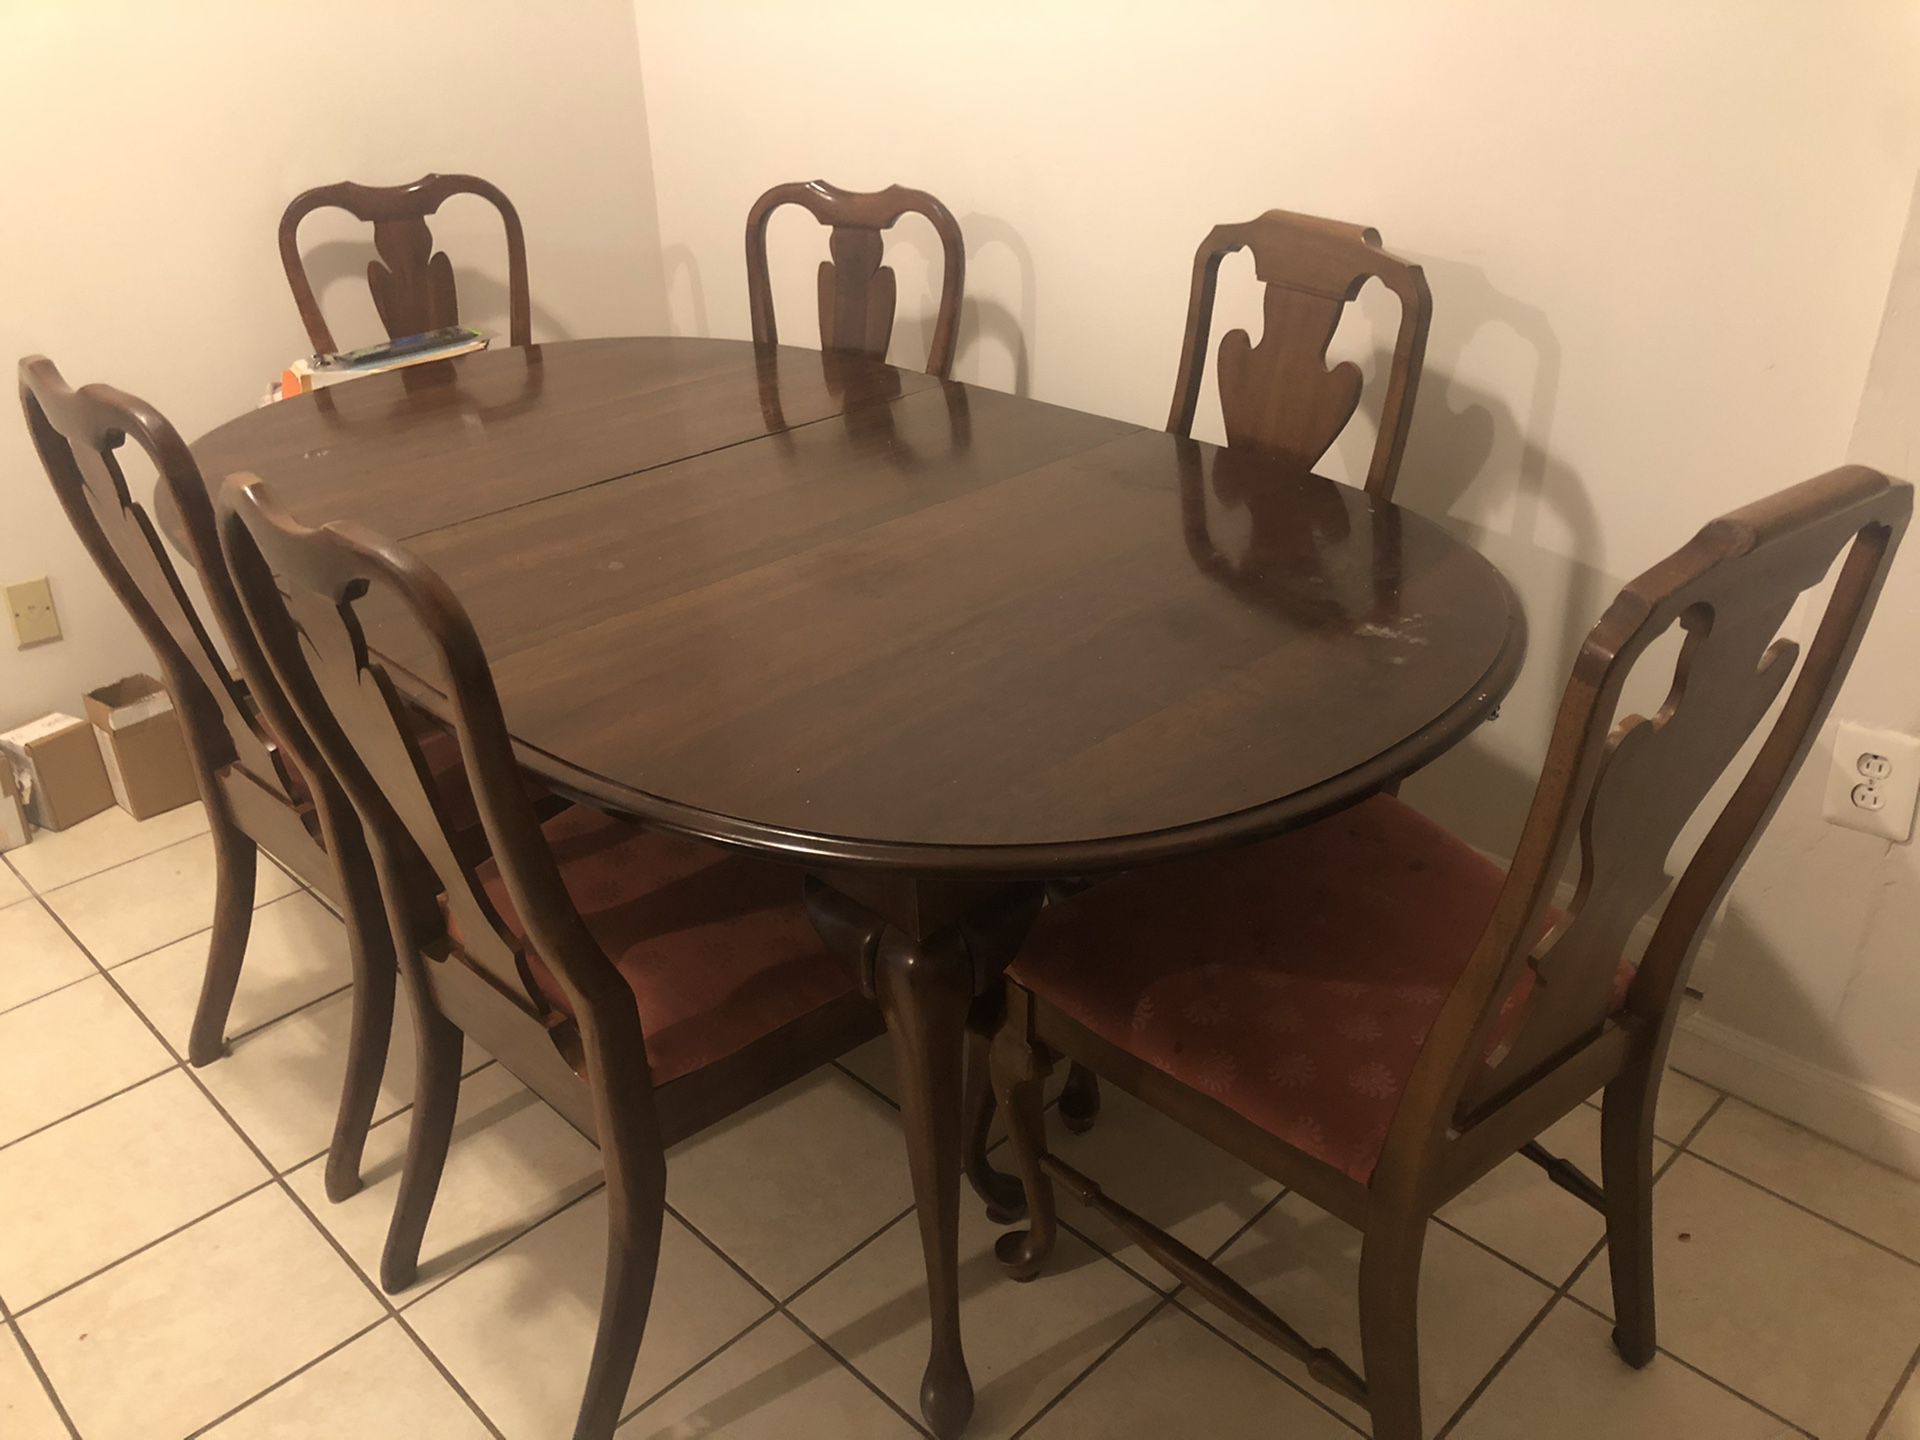 Dining table set, ready to pick it up